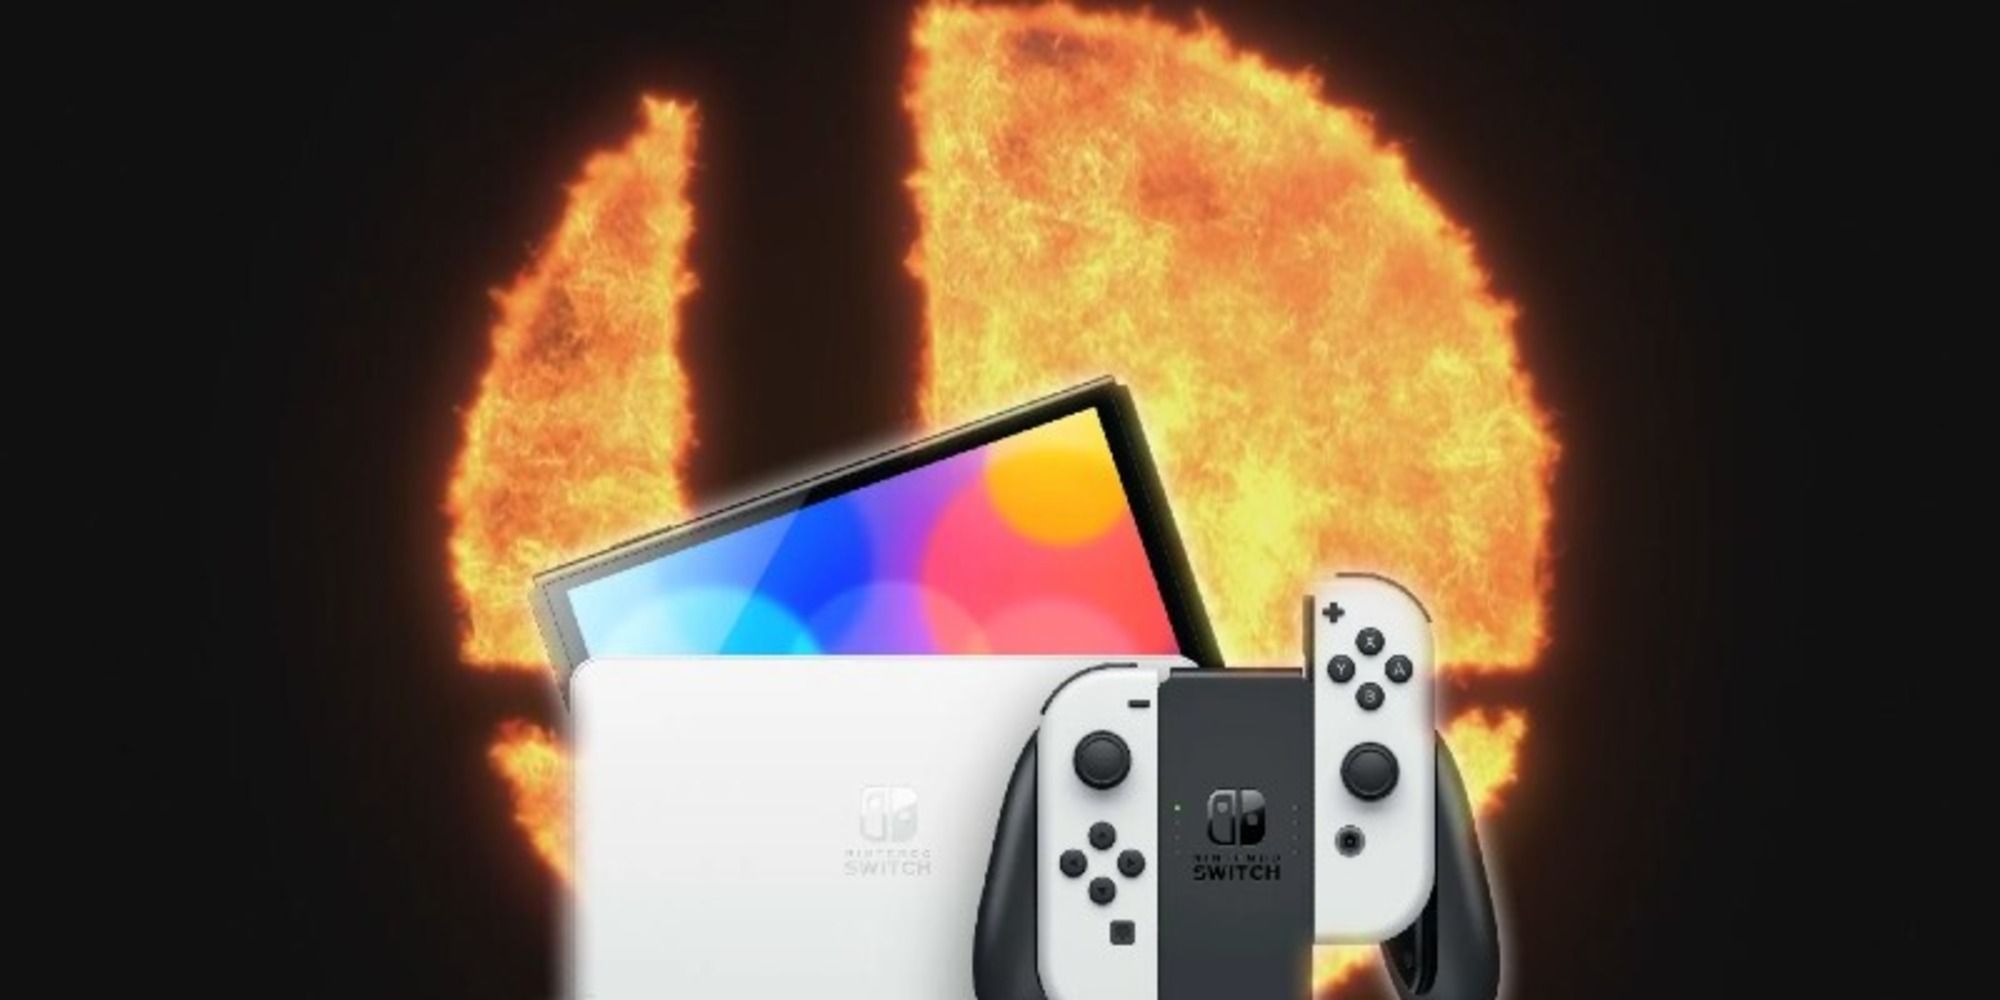 The Smash fire logo with a Nintendo Switch OLED Model in the foreground.